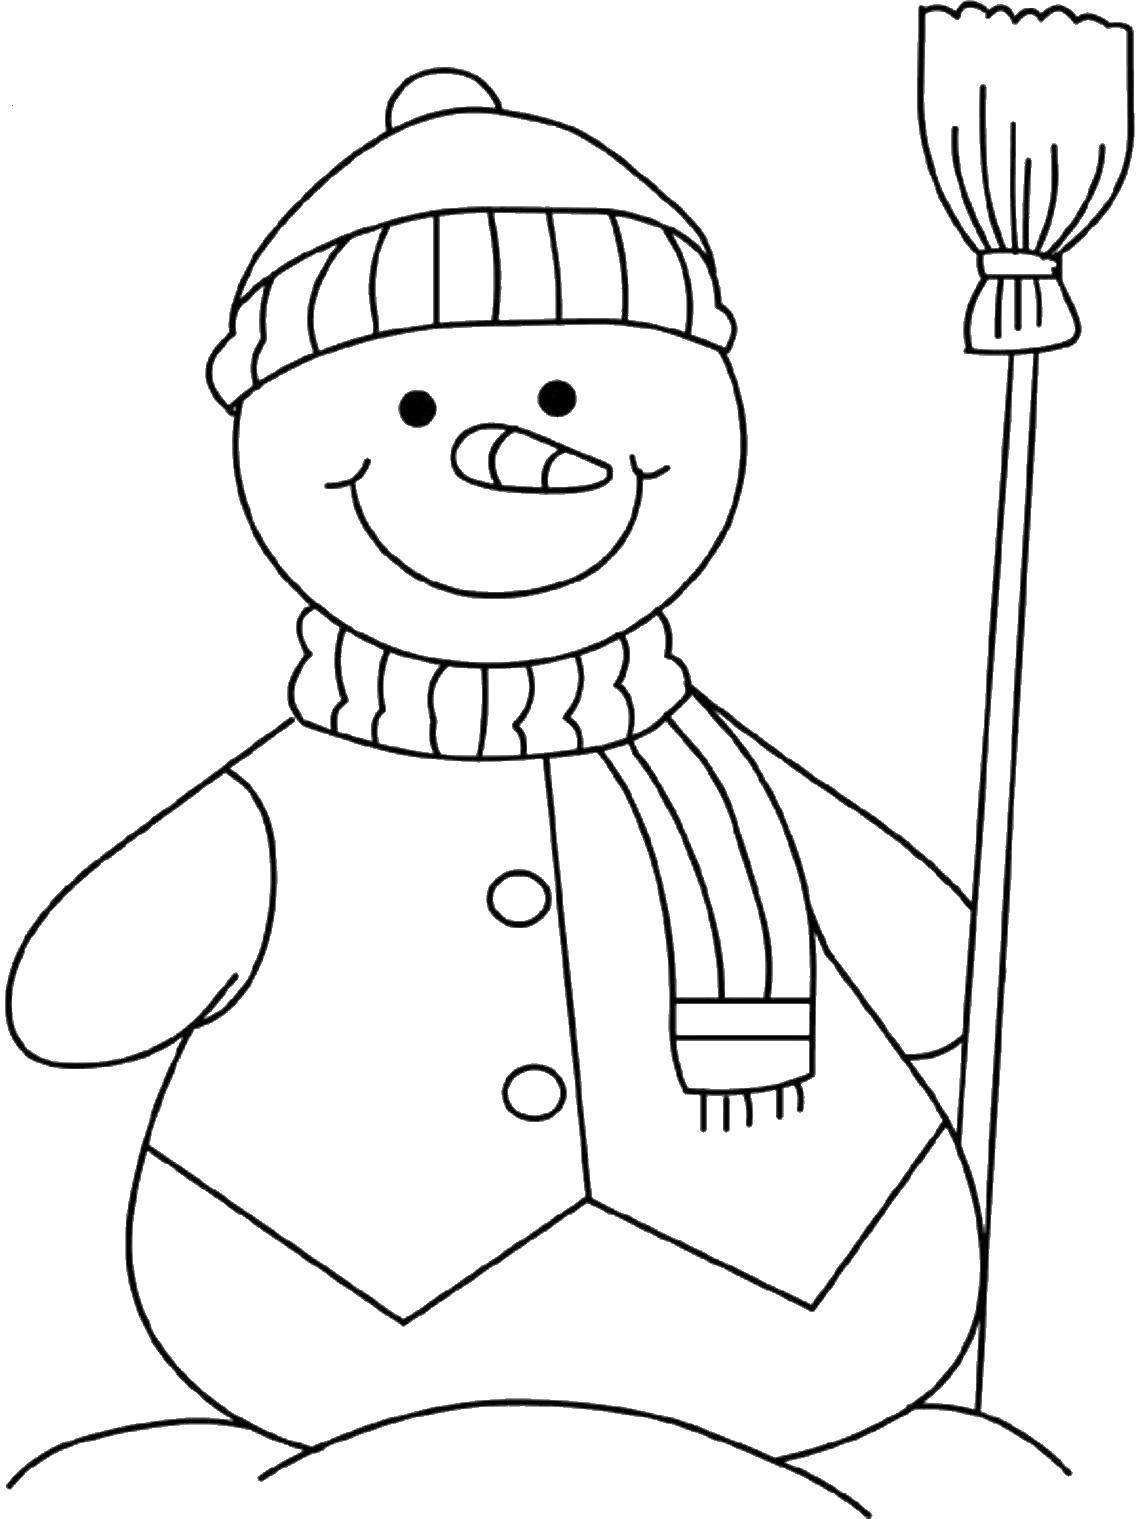 Coloring Snowman with broom. Category snowman. Tags:  snowmen, winter, snow.